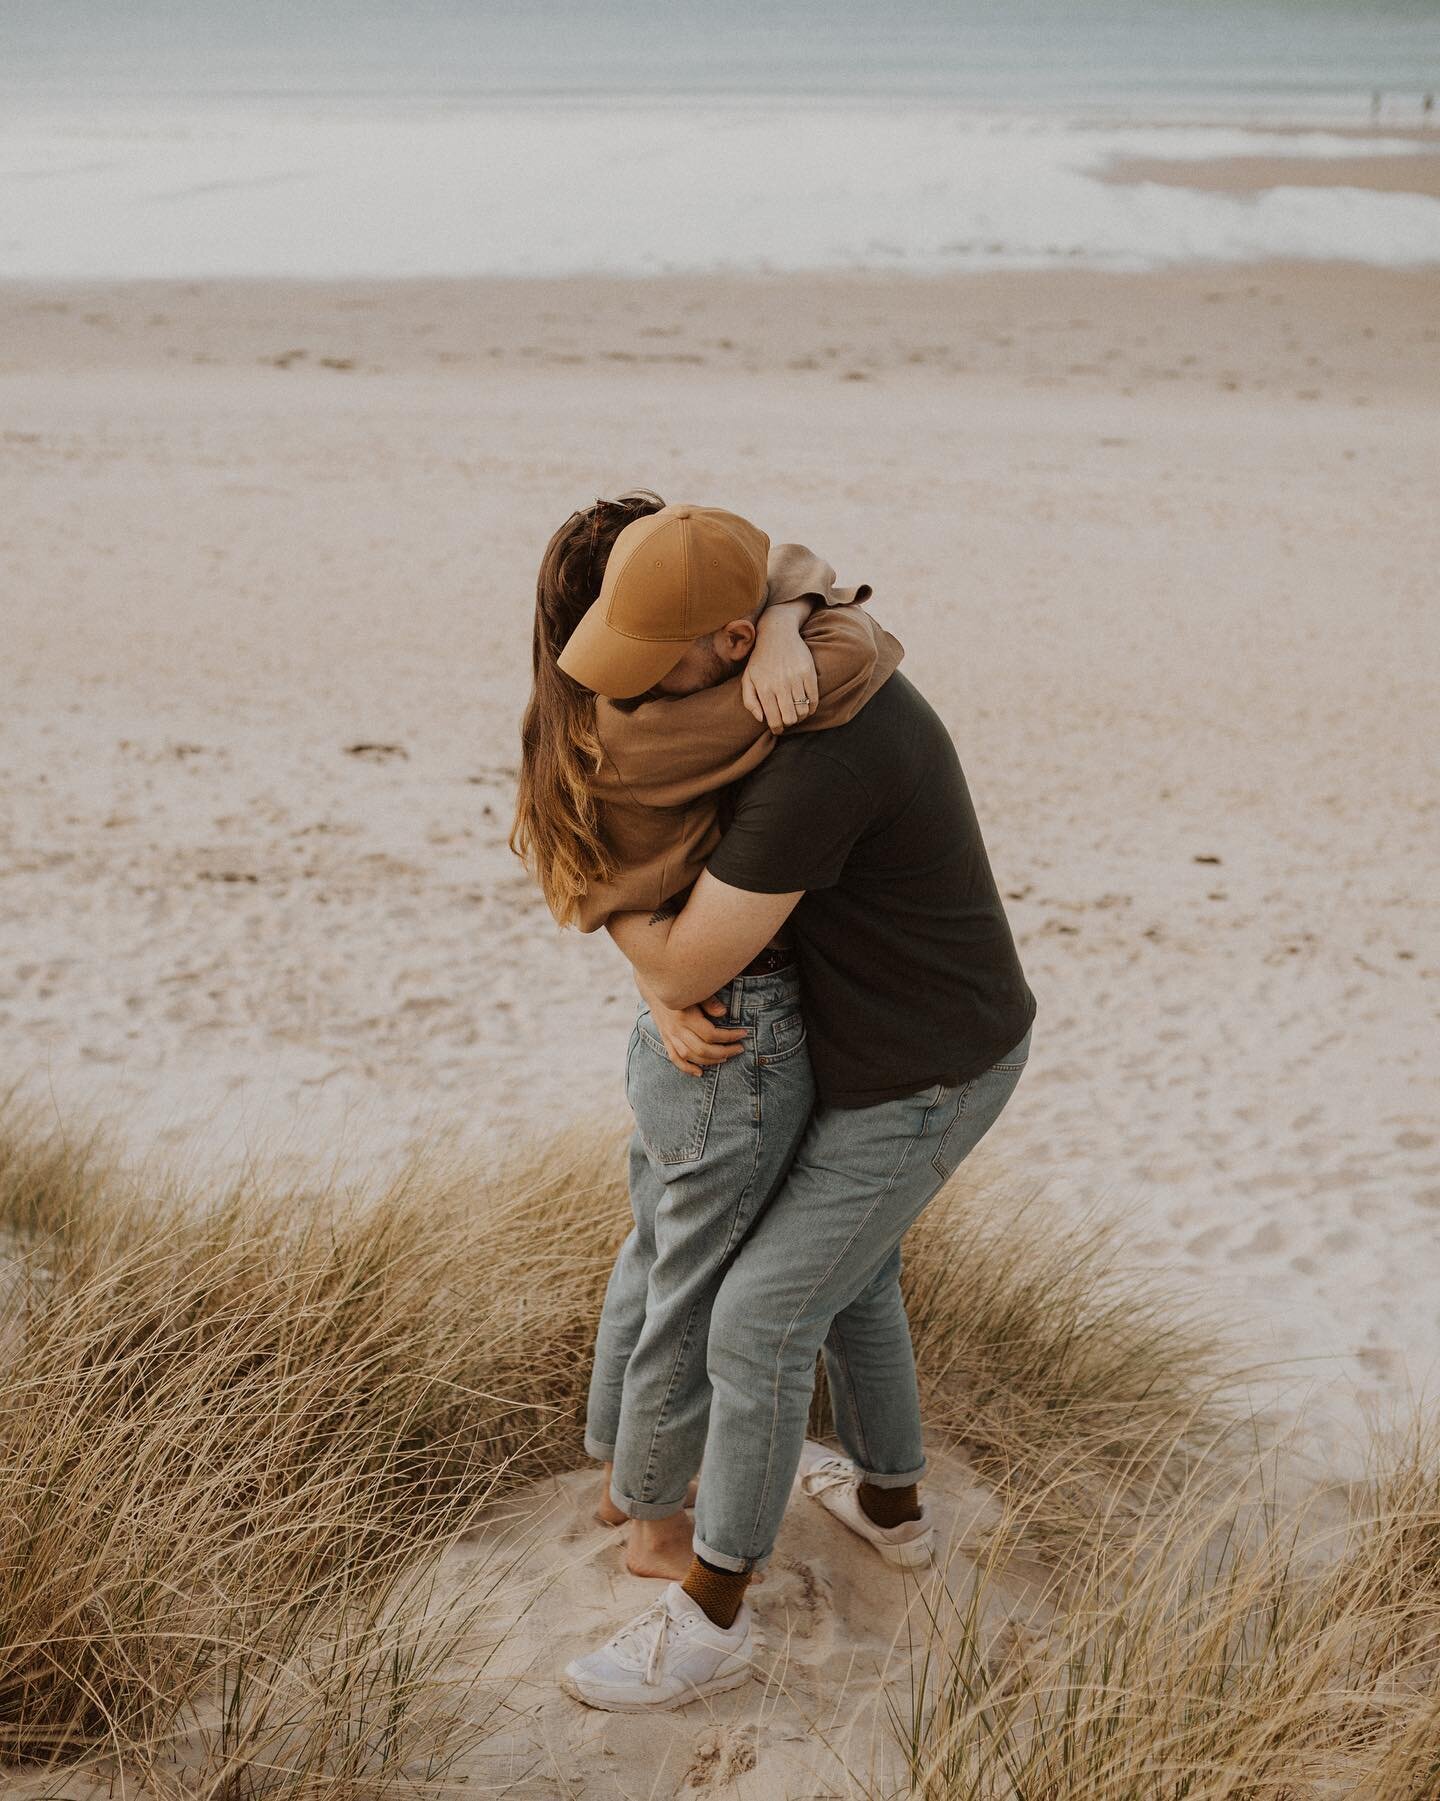 Before we left for Skye, we stopped off at this beautiful beach and I took some photos of our besties @joannaelizaphotography &amp; @gullandcofilms and I looooove them! This is a beach they spend time at regularly and love to visit, so it was so spec